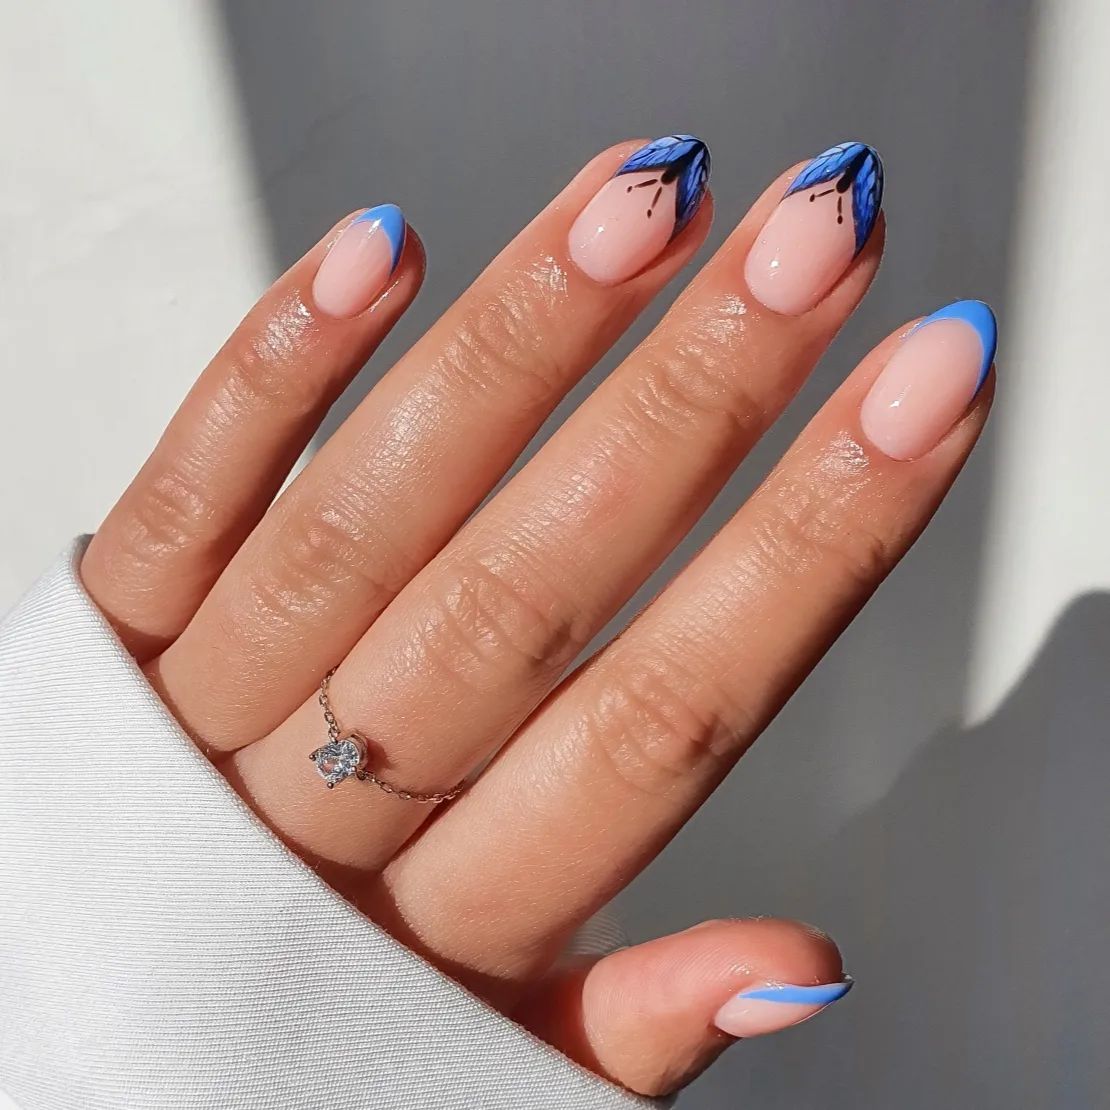 Short Nails with Blue Butterfly Design on Tips